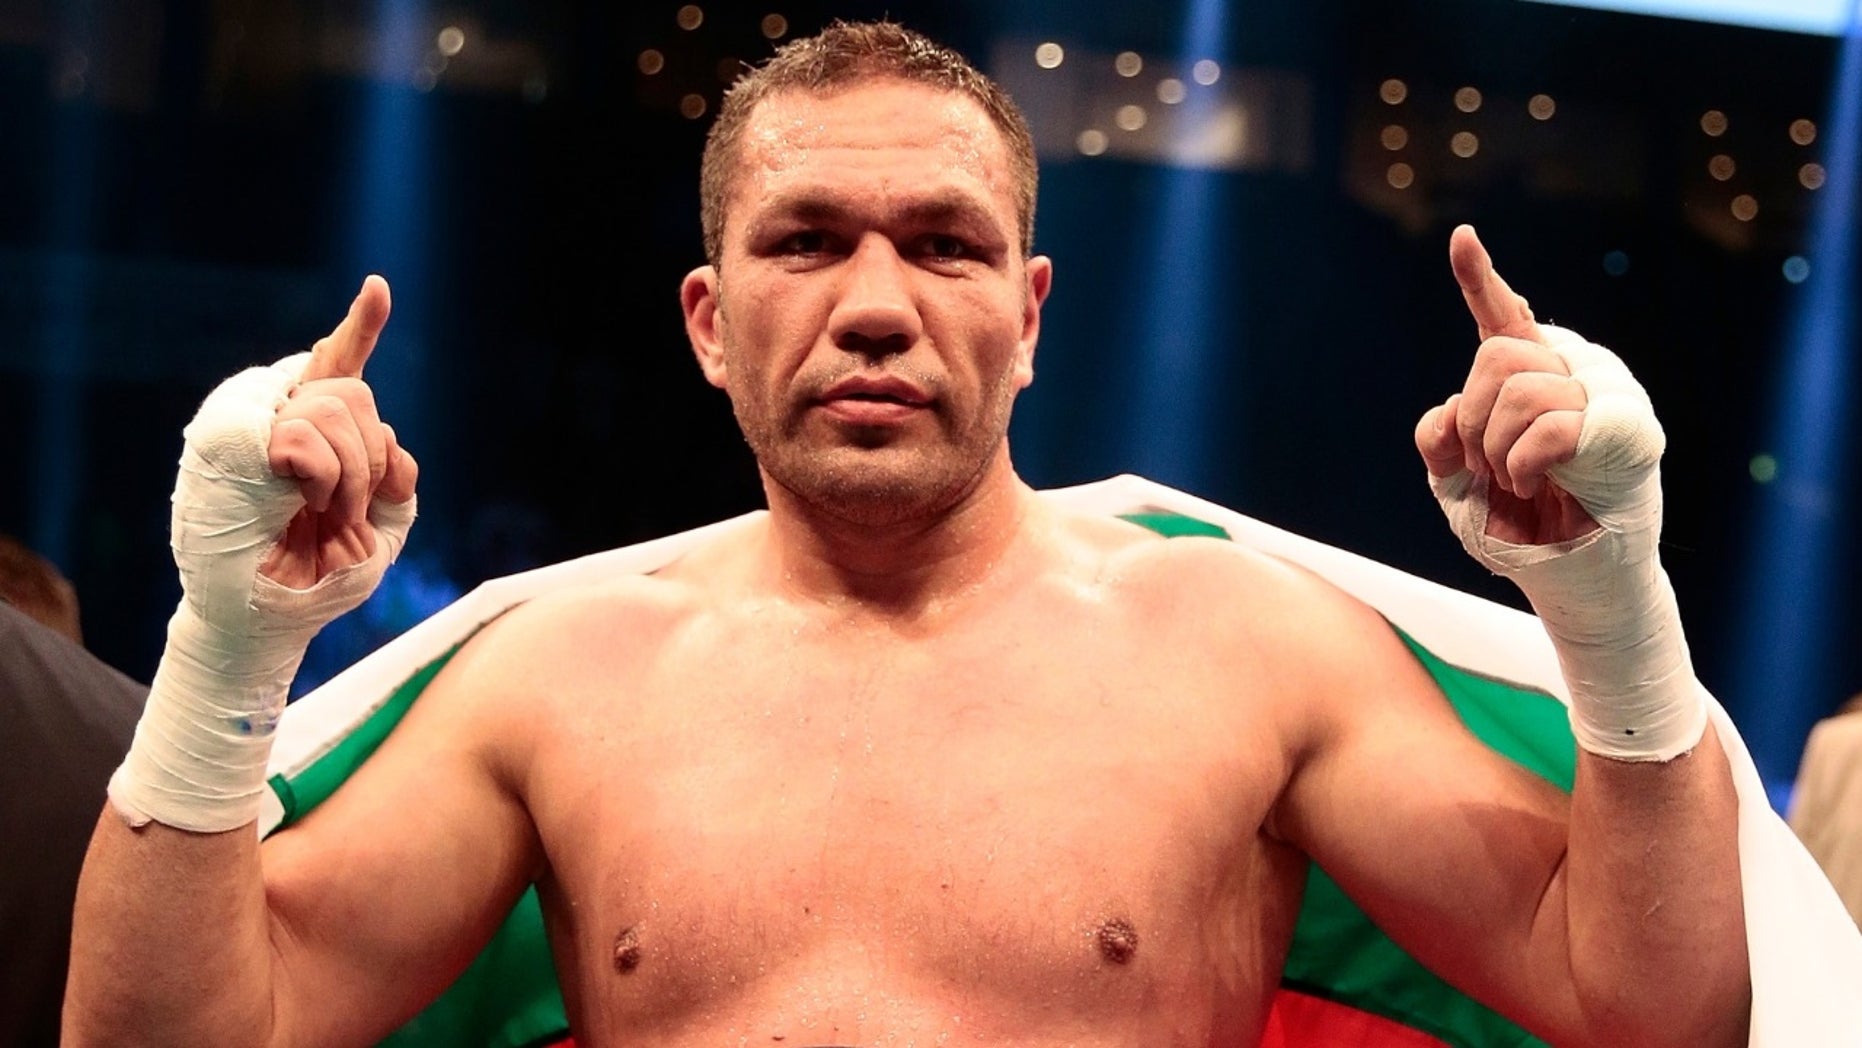 Bulgarian boxer Kubrat Pulev kissed reporter Jenny SuShe while she interviewed him following his fight on Saturday, March 23, 2019.